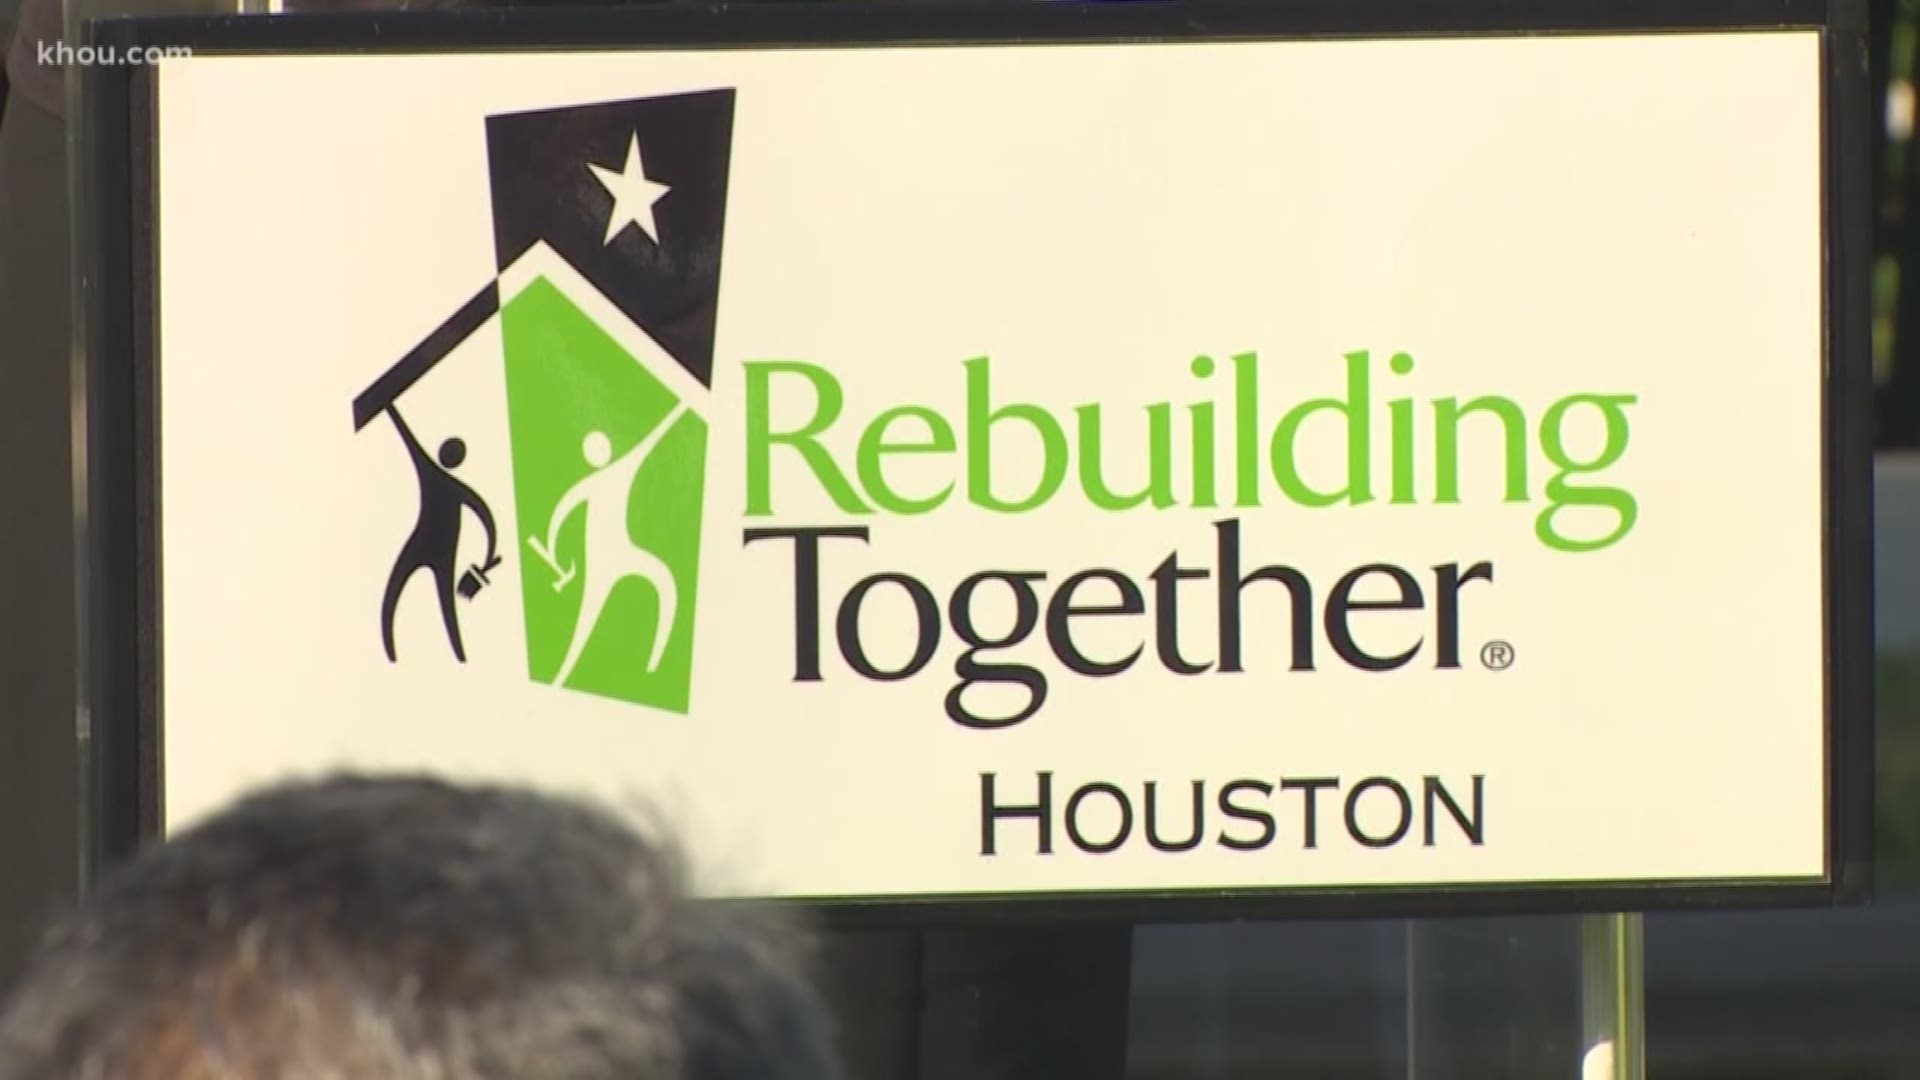 On Thursday, Mayor Sylvester Turner and Rebuilding Together Houston kicked off a new community revitalization initiative to repair homes for families in need.